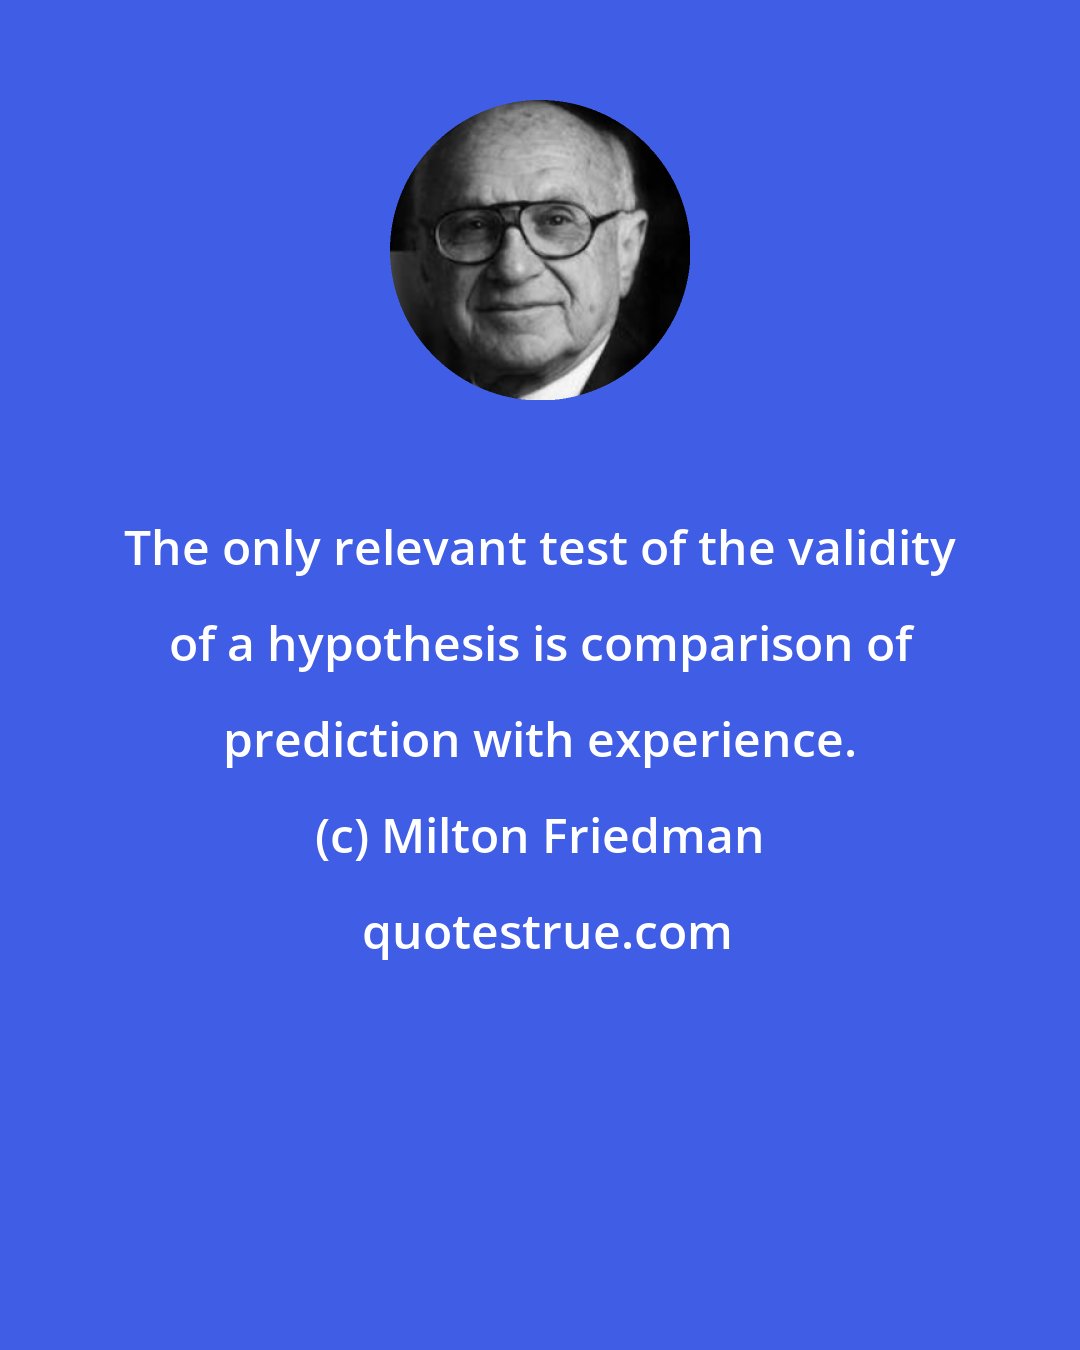 Milton Friedman: The only relevant test of the validity of a hypothesis is comparison of prediction with experience.